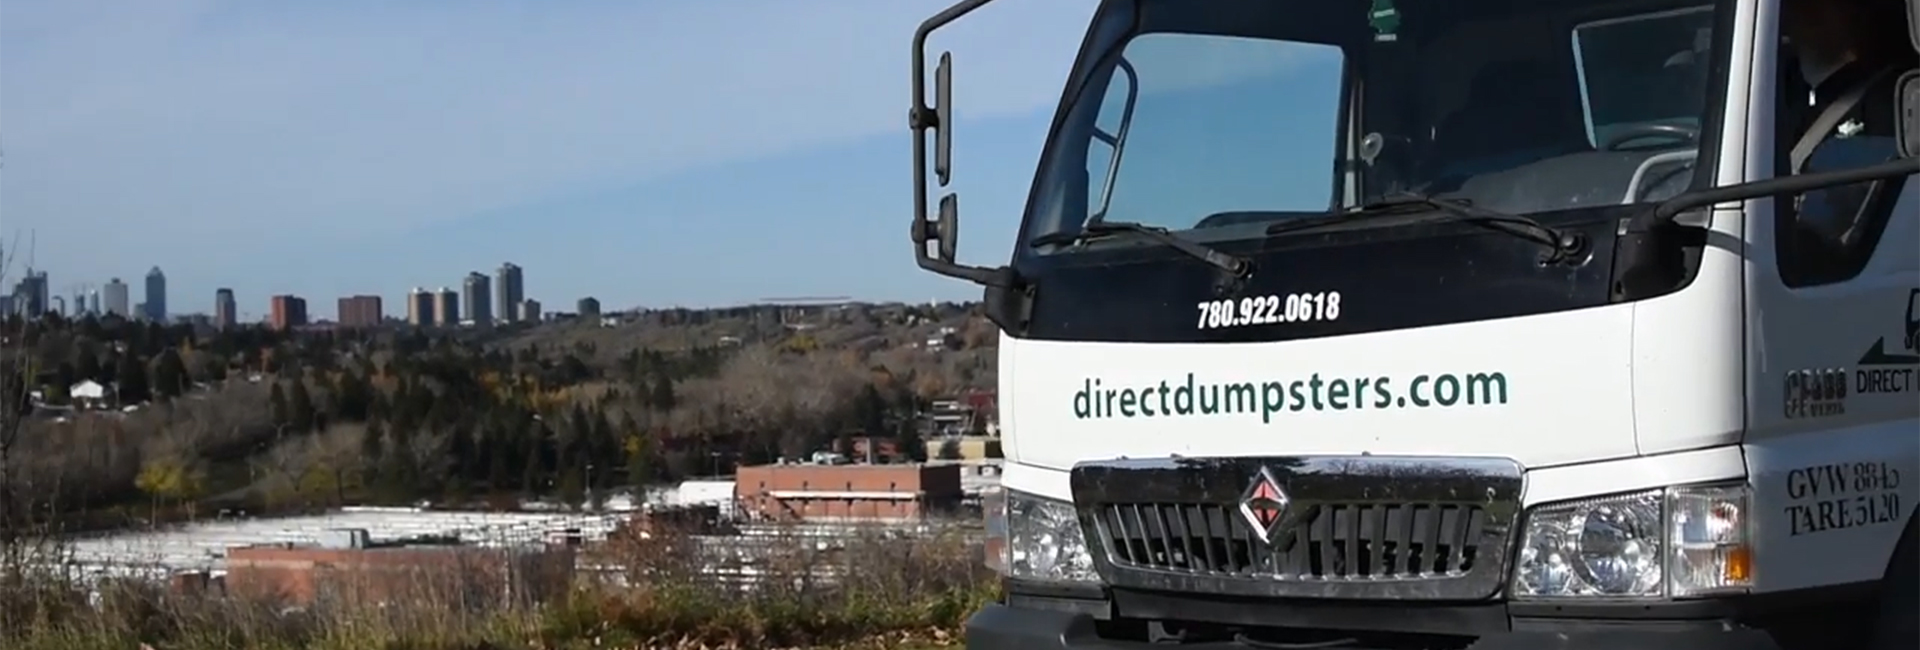 Direct Dumpsters Garbage Bin Delivery